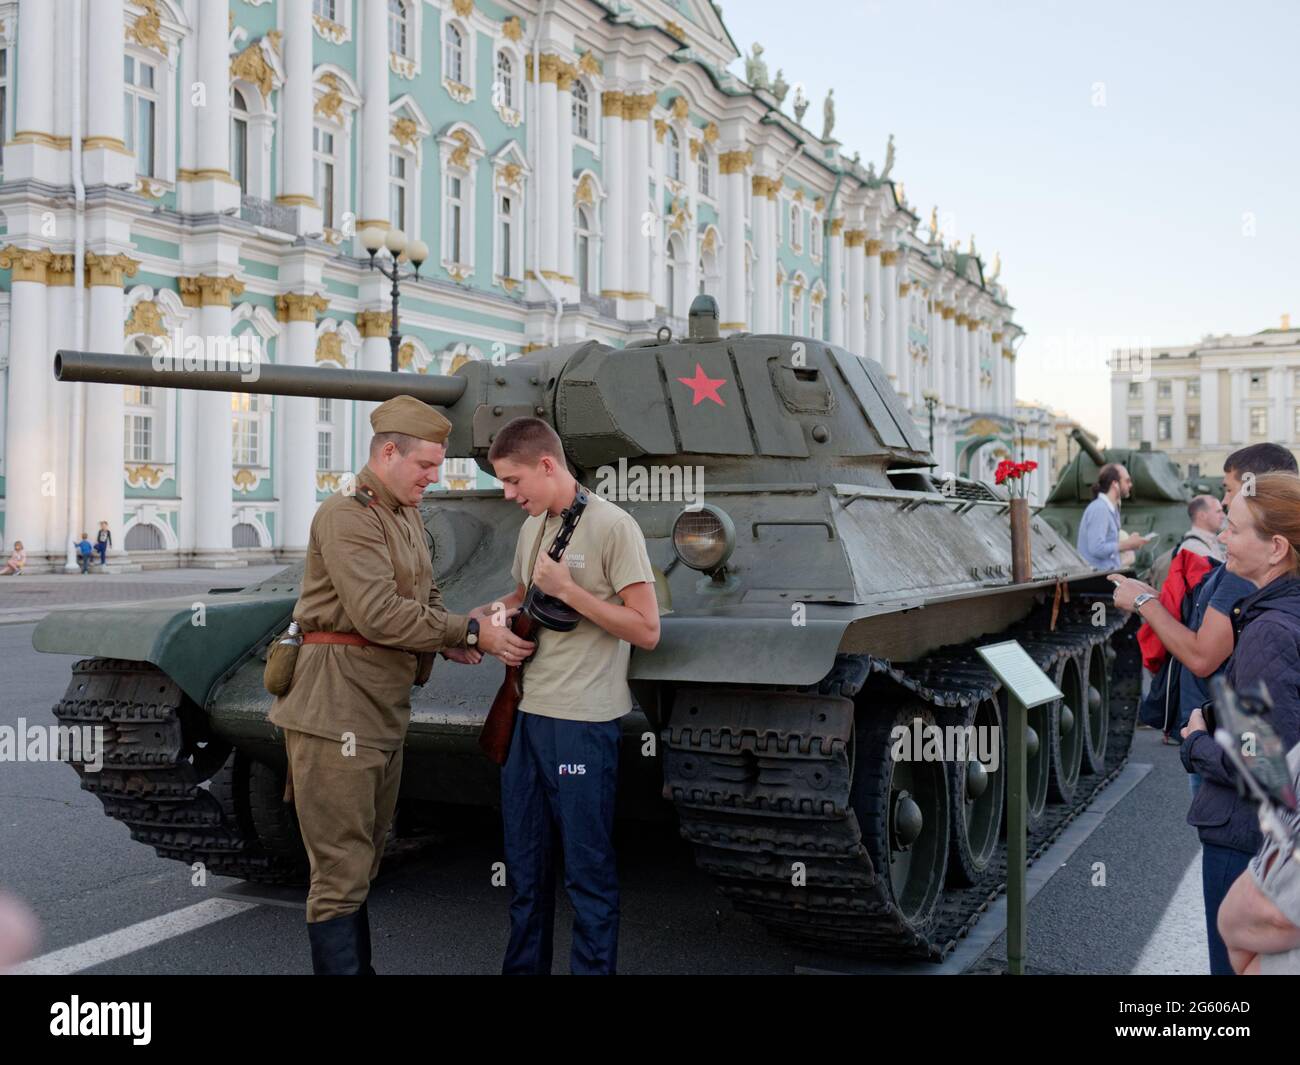 St. Petersburg, Russia, 9th August, 2017: People with retro submachine gun posing against a retro tank on Palace square during the parade-exhibition of military equipment dedicated to the anniversary of the ending of battle for Leningrad in 1944 Stock Photo